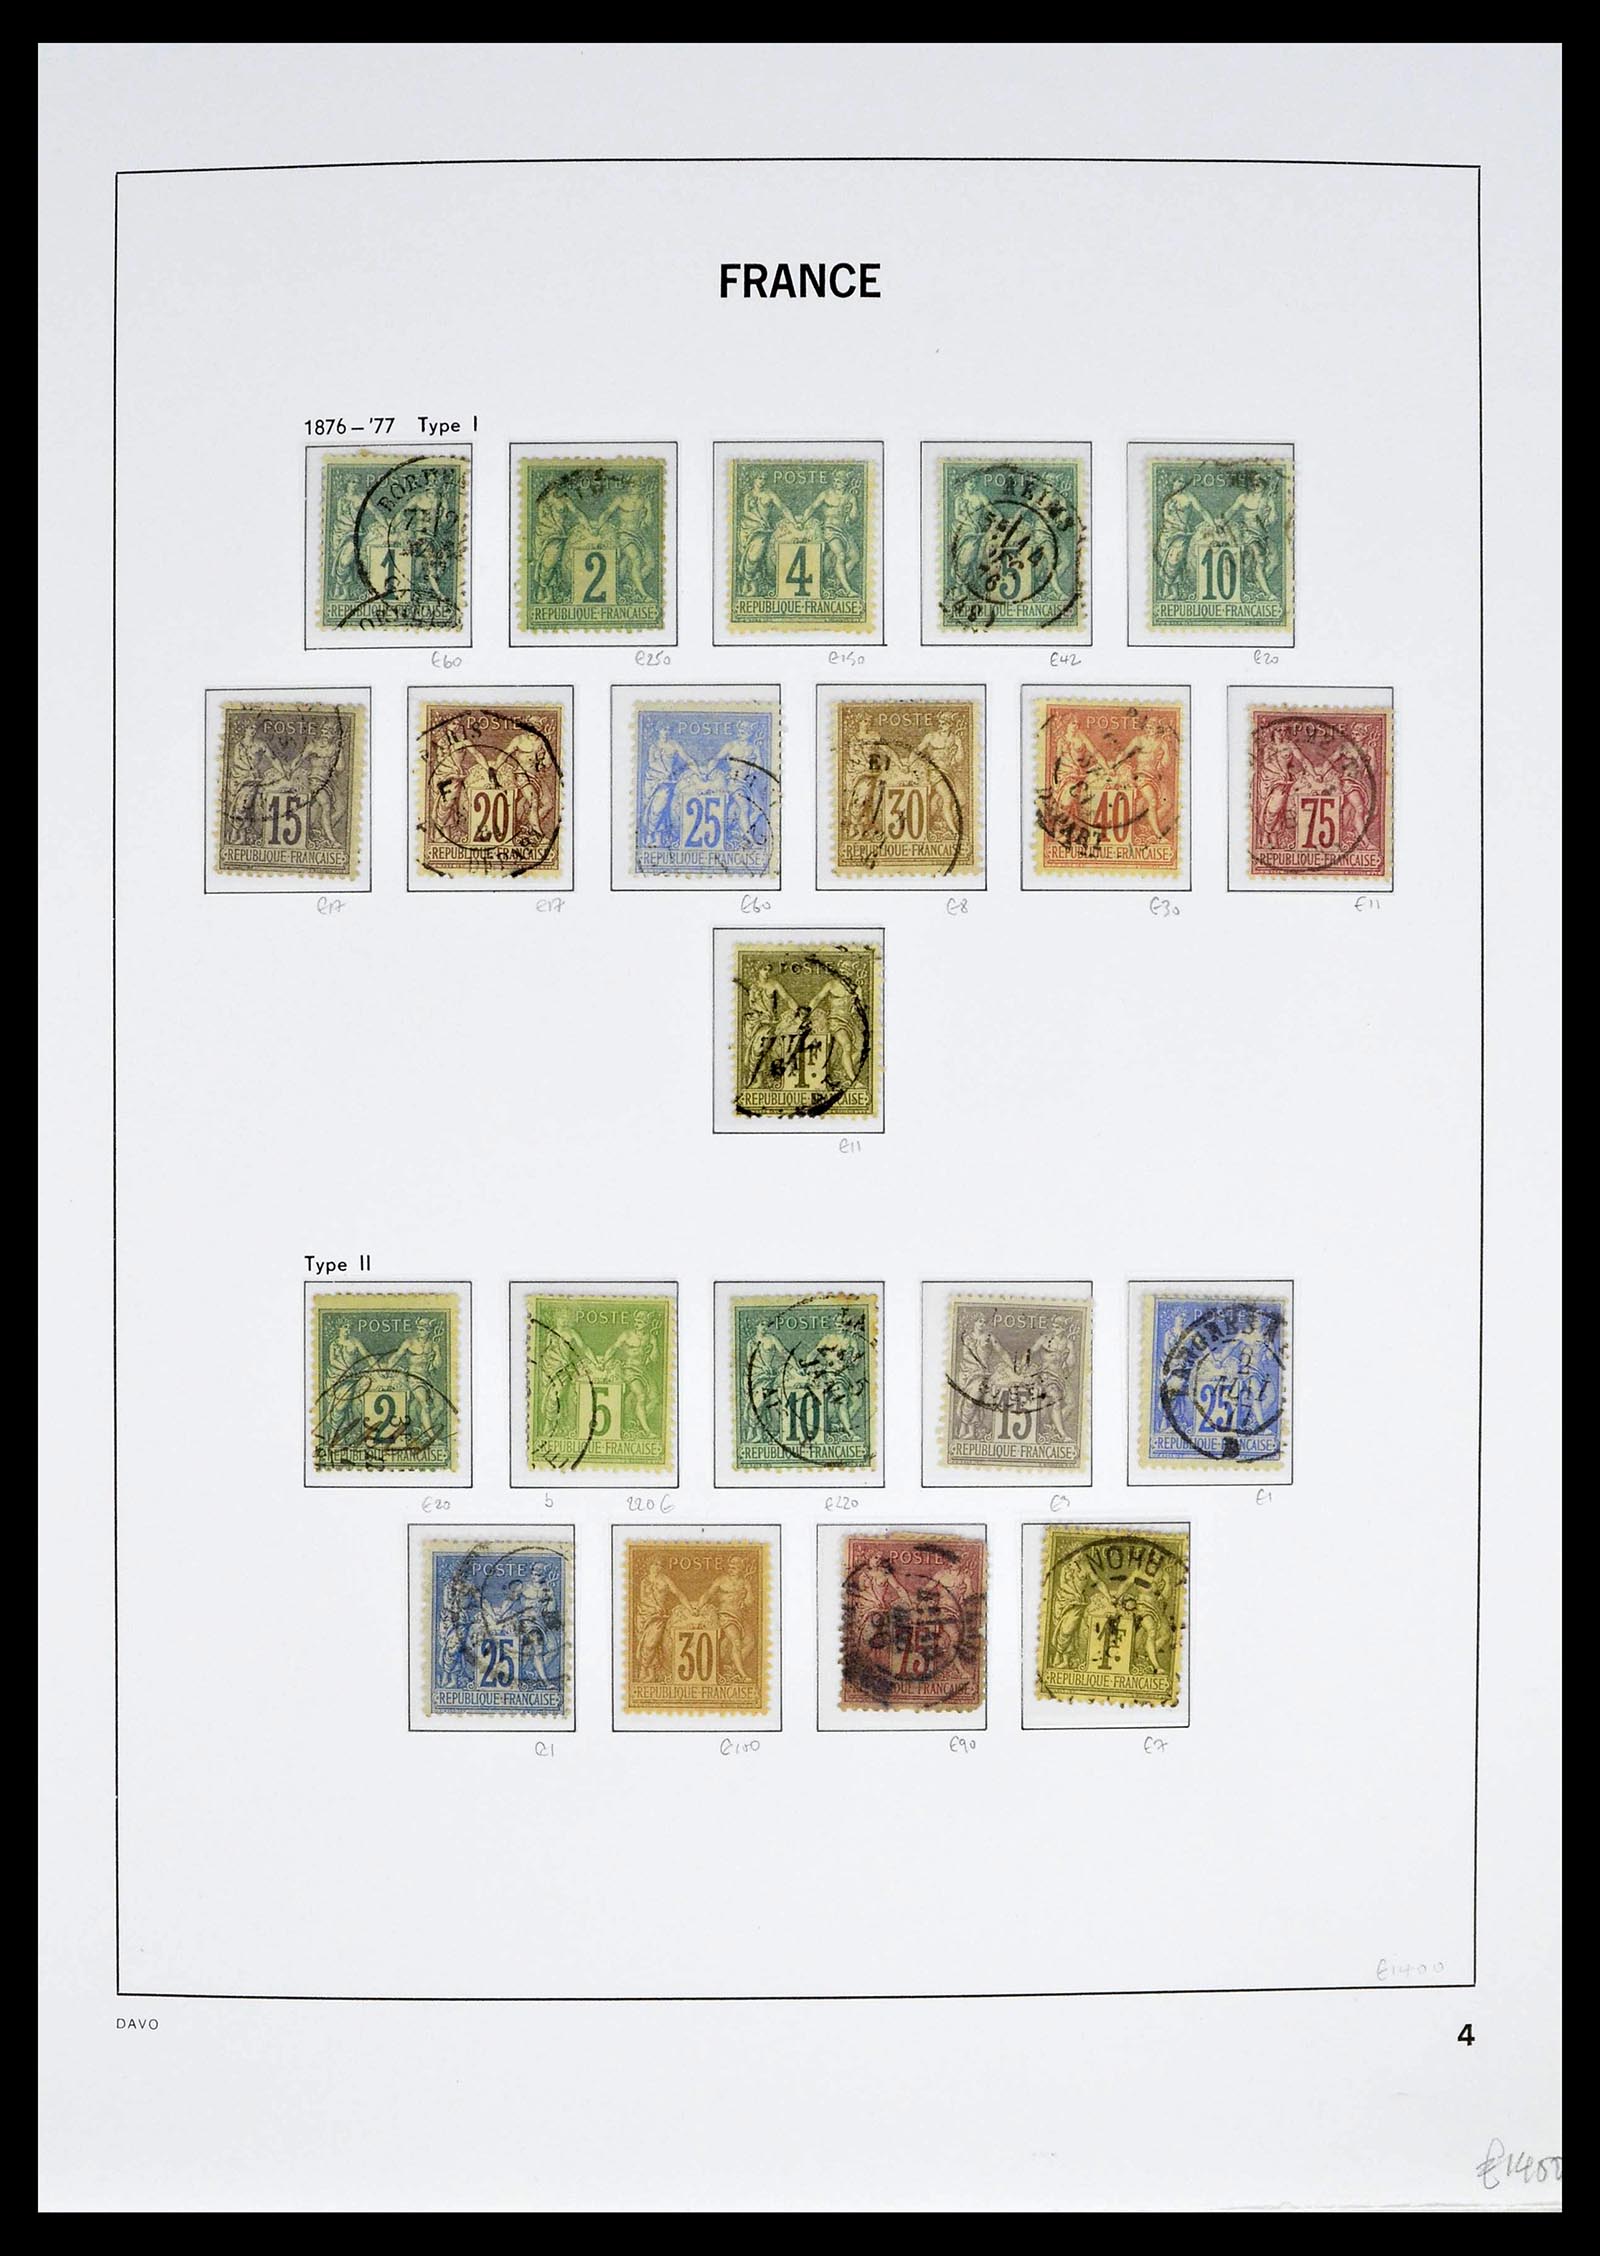 39335 0009 - Stamp collection 39335 France 1849-1969.